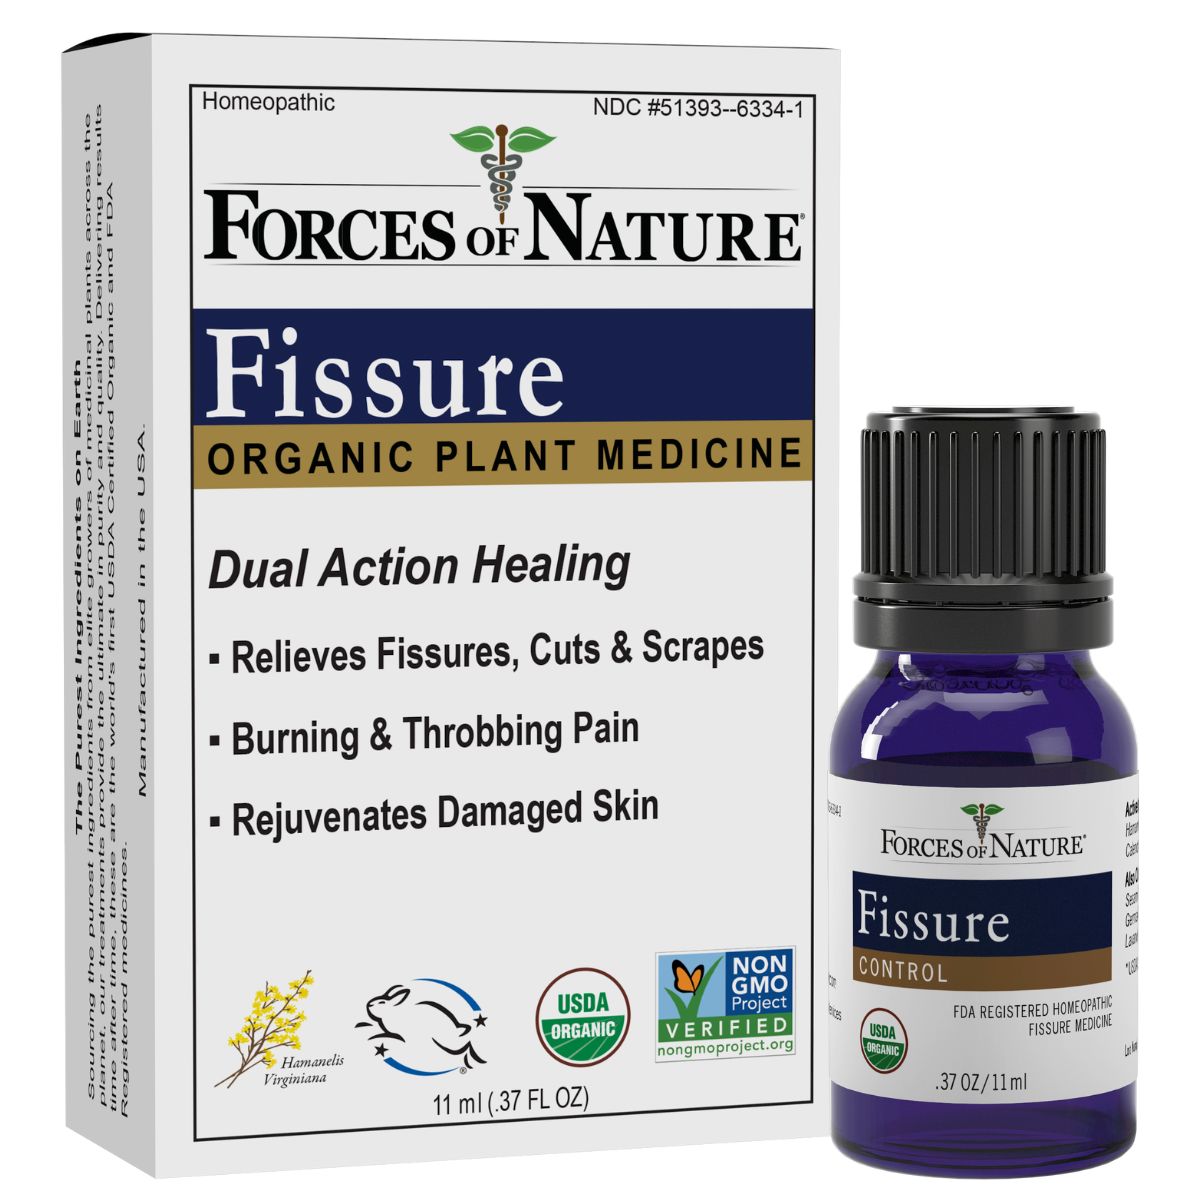 Forces of Nature - Fissure Control - 11 ml. - image 1 of 5